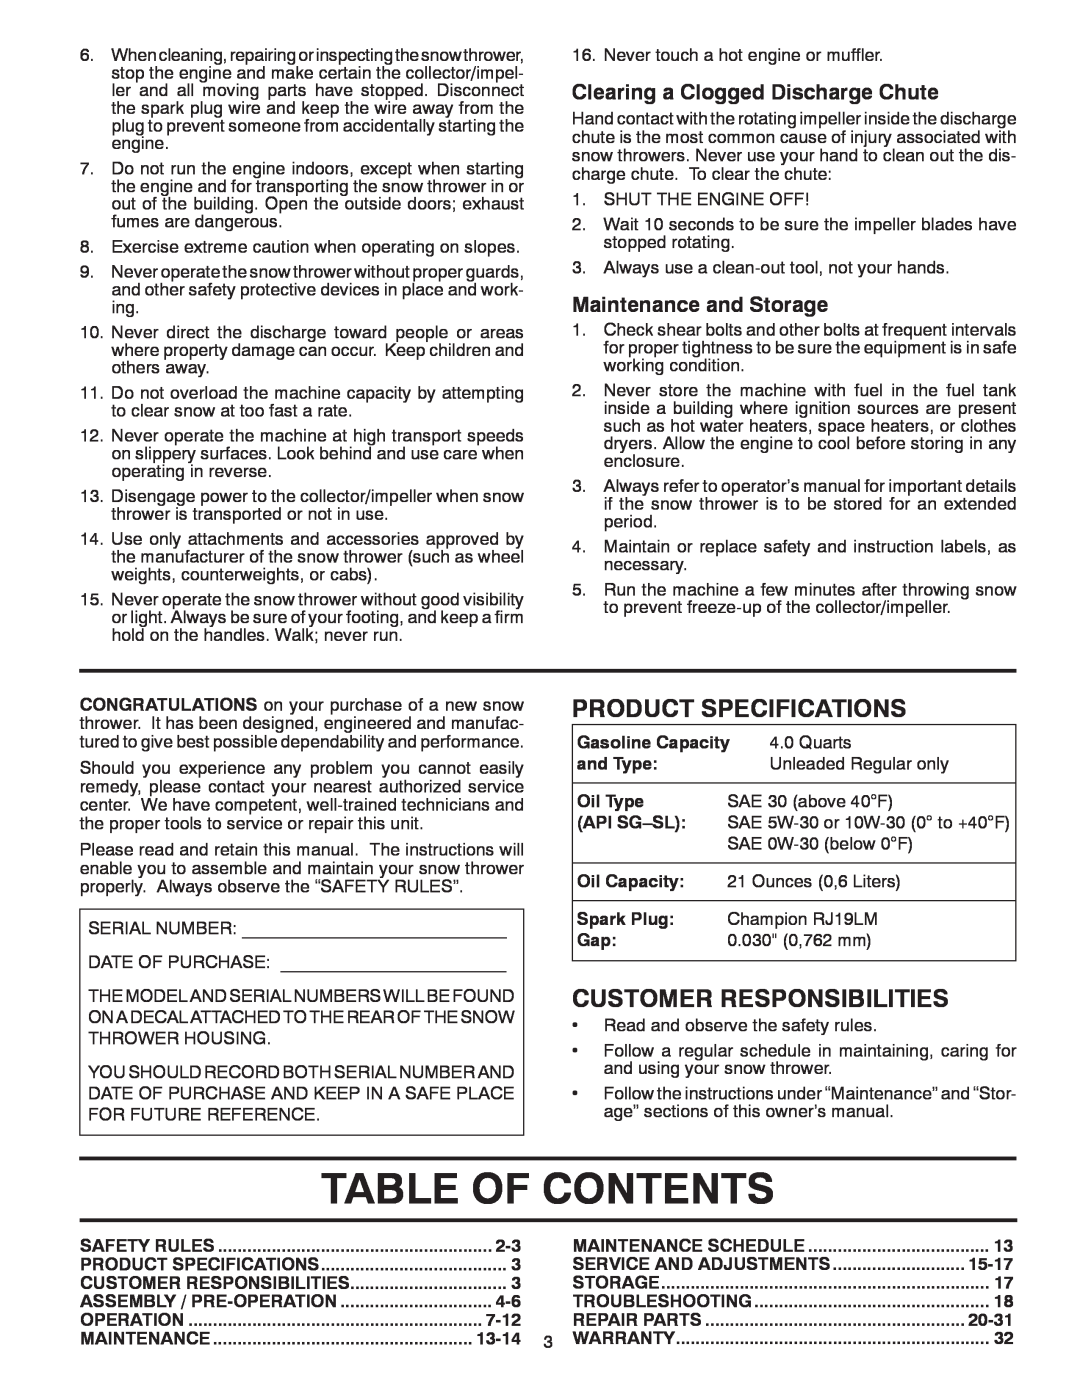 Poulan 416833 Table Of Contents, Product Specifications, Customer Responsibilities, Clearing a Clogged Discharge Chute 